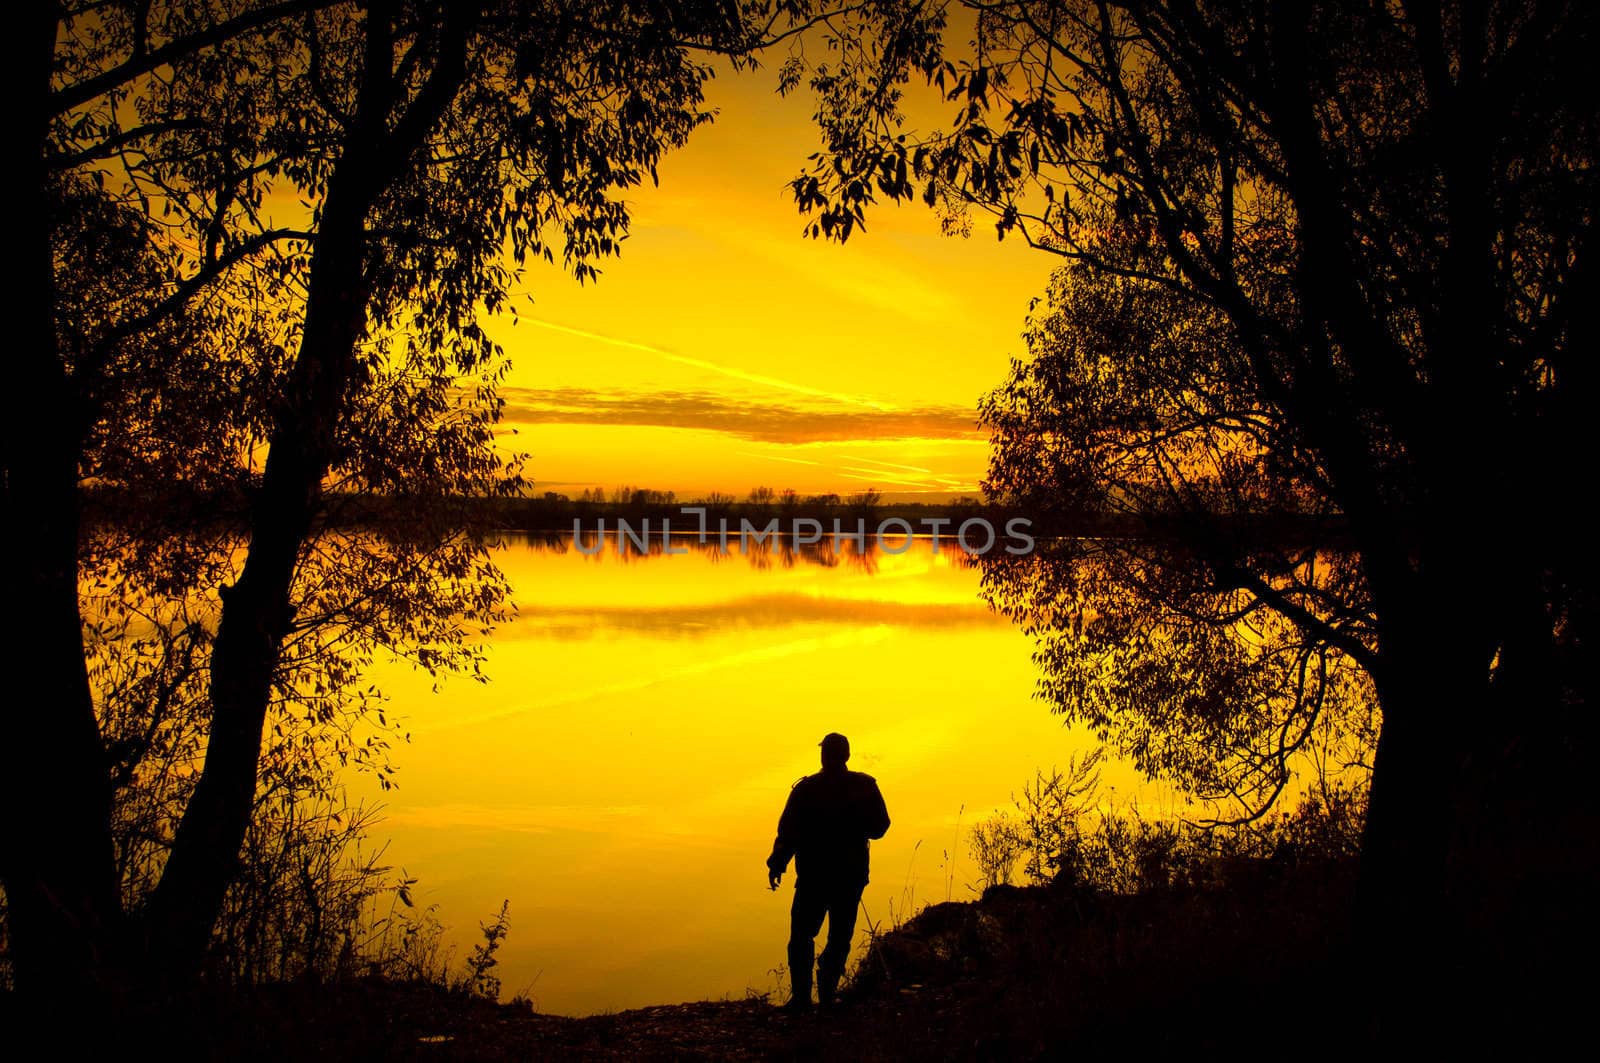 Silhouette of a man at sunset